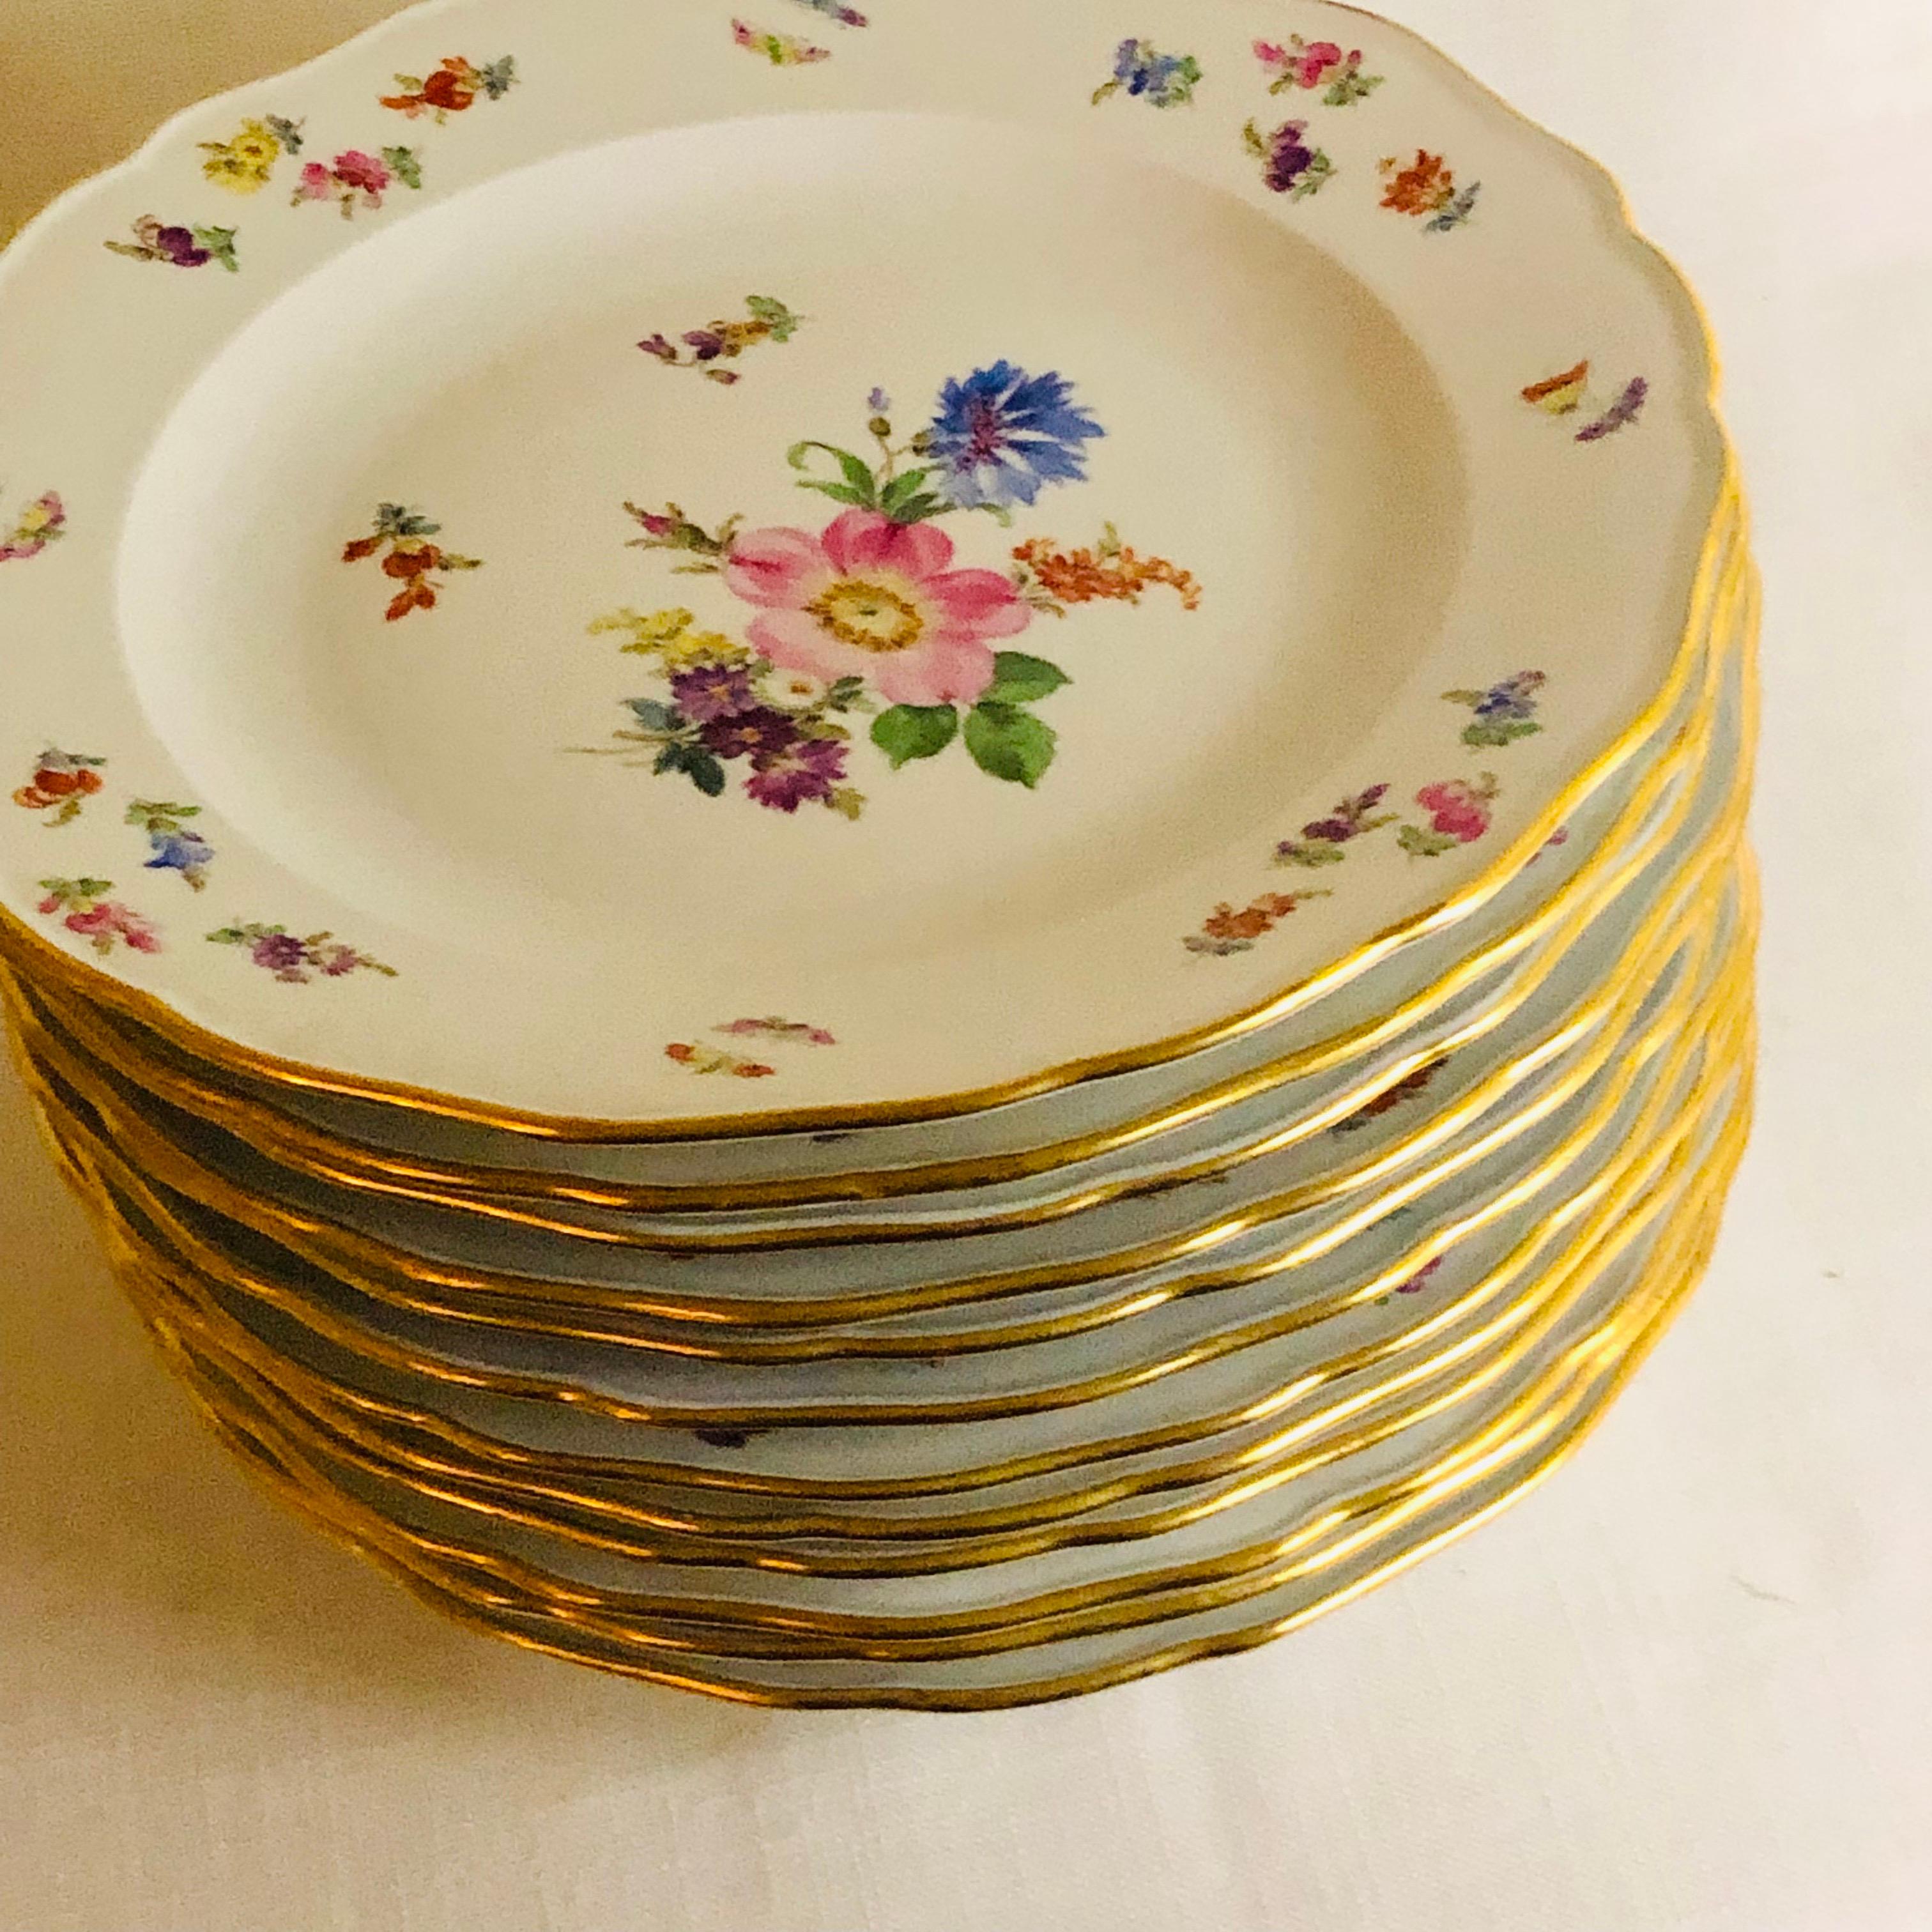 Set of 12 Meissen Dinner Plates Each Painted with a Different Bouquet of Flowers 6